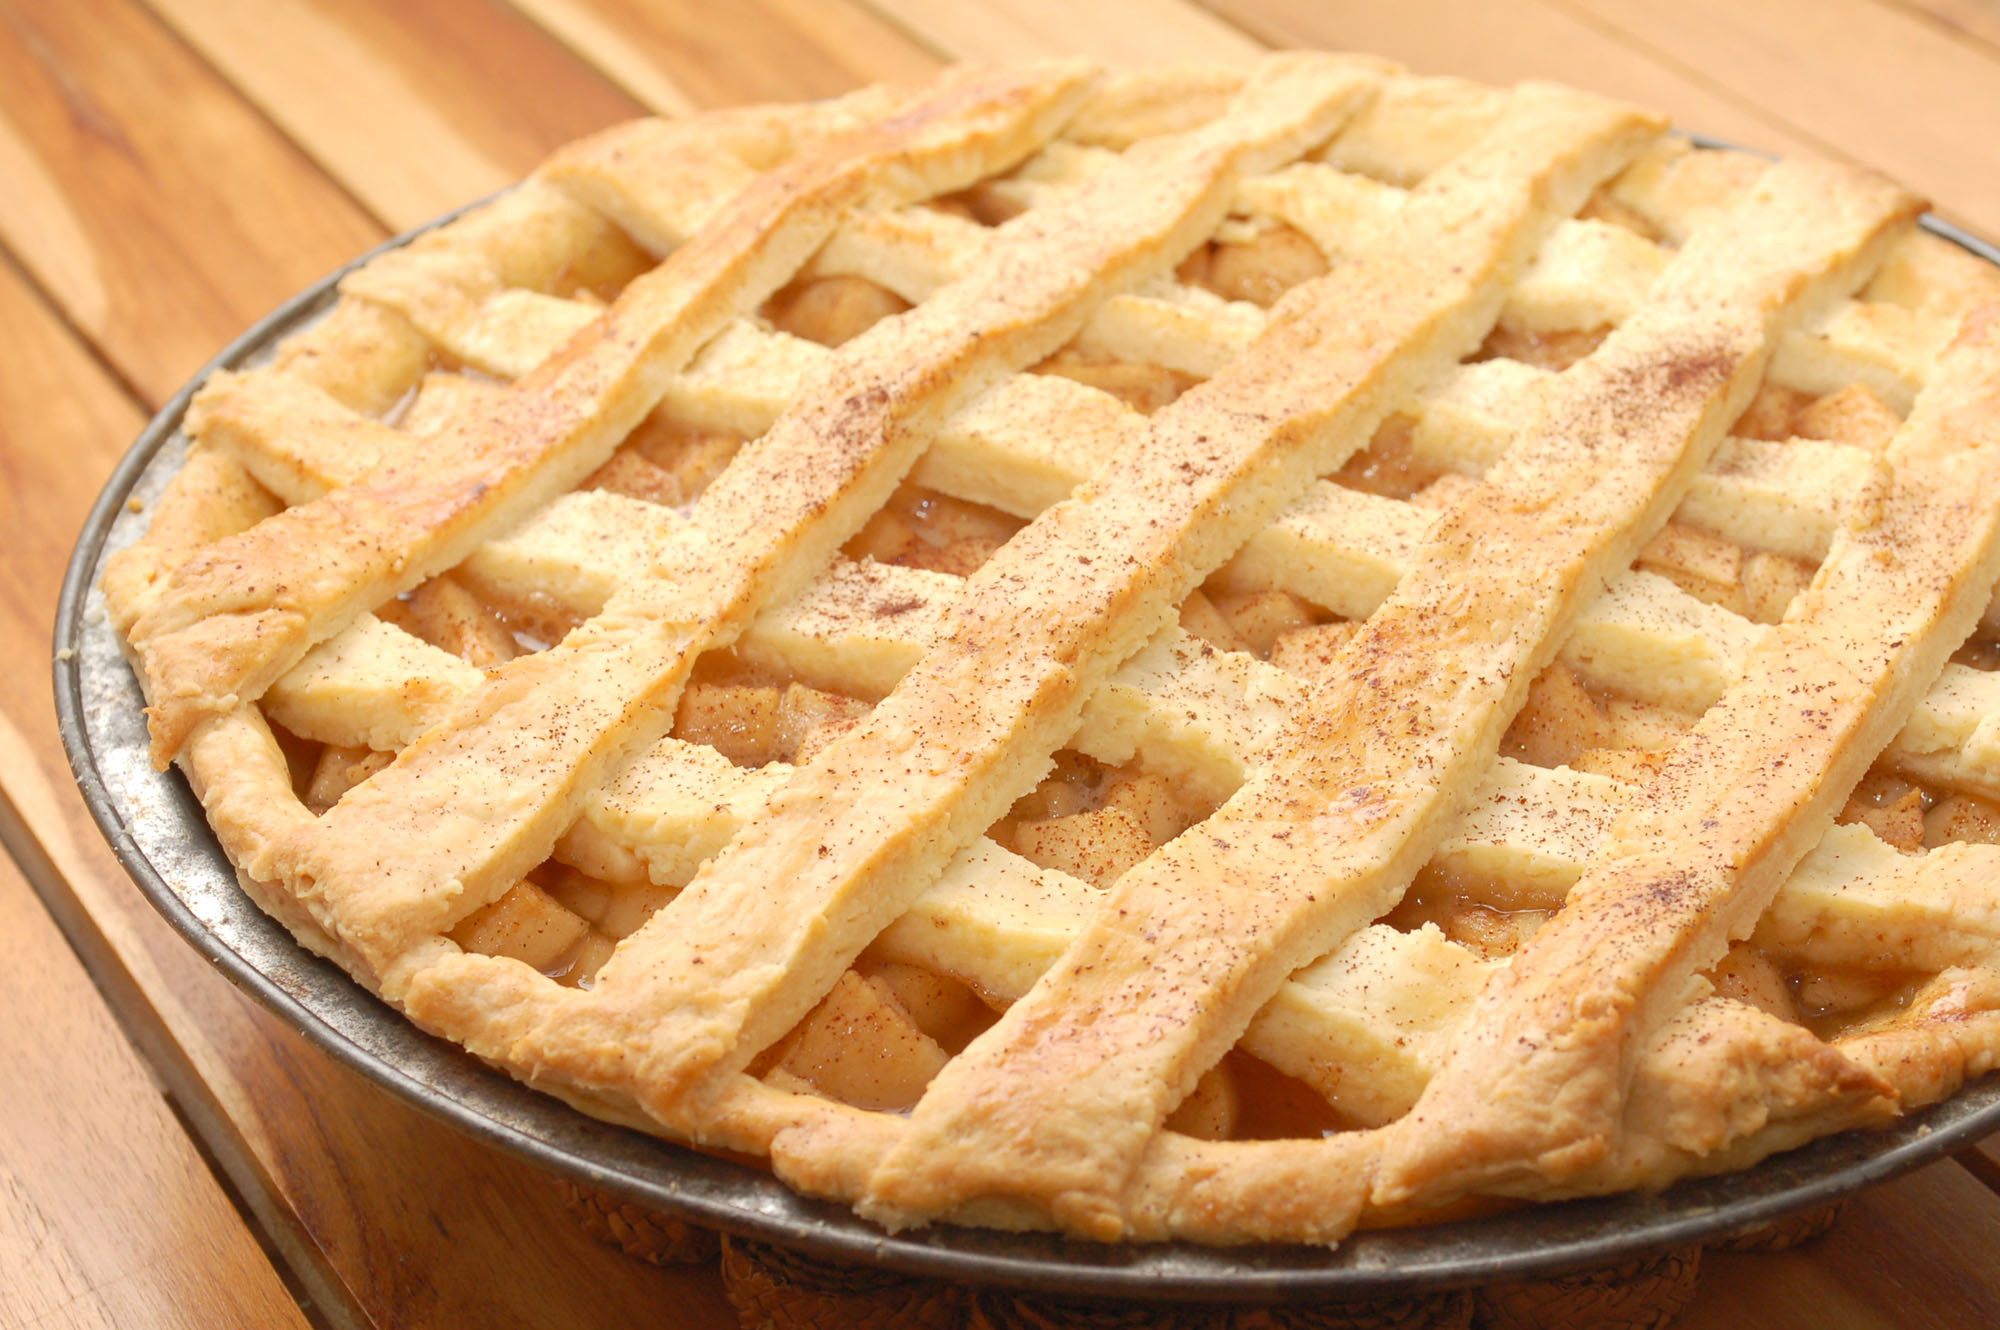 How To Make Apple Pie
 How to Bake an Apple Pie from Scratch with